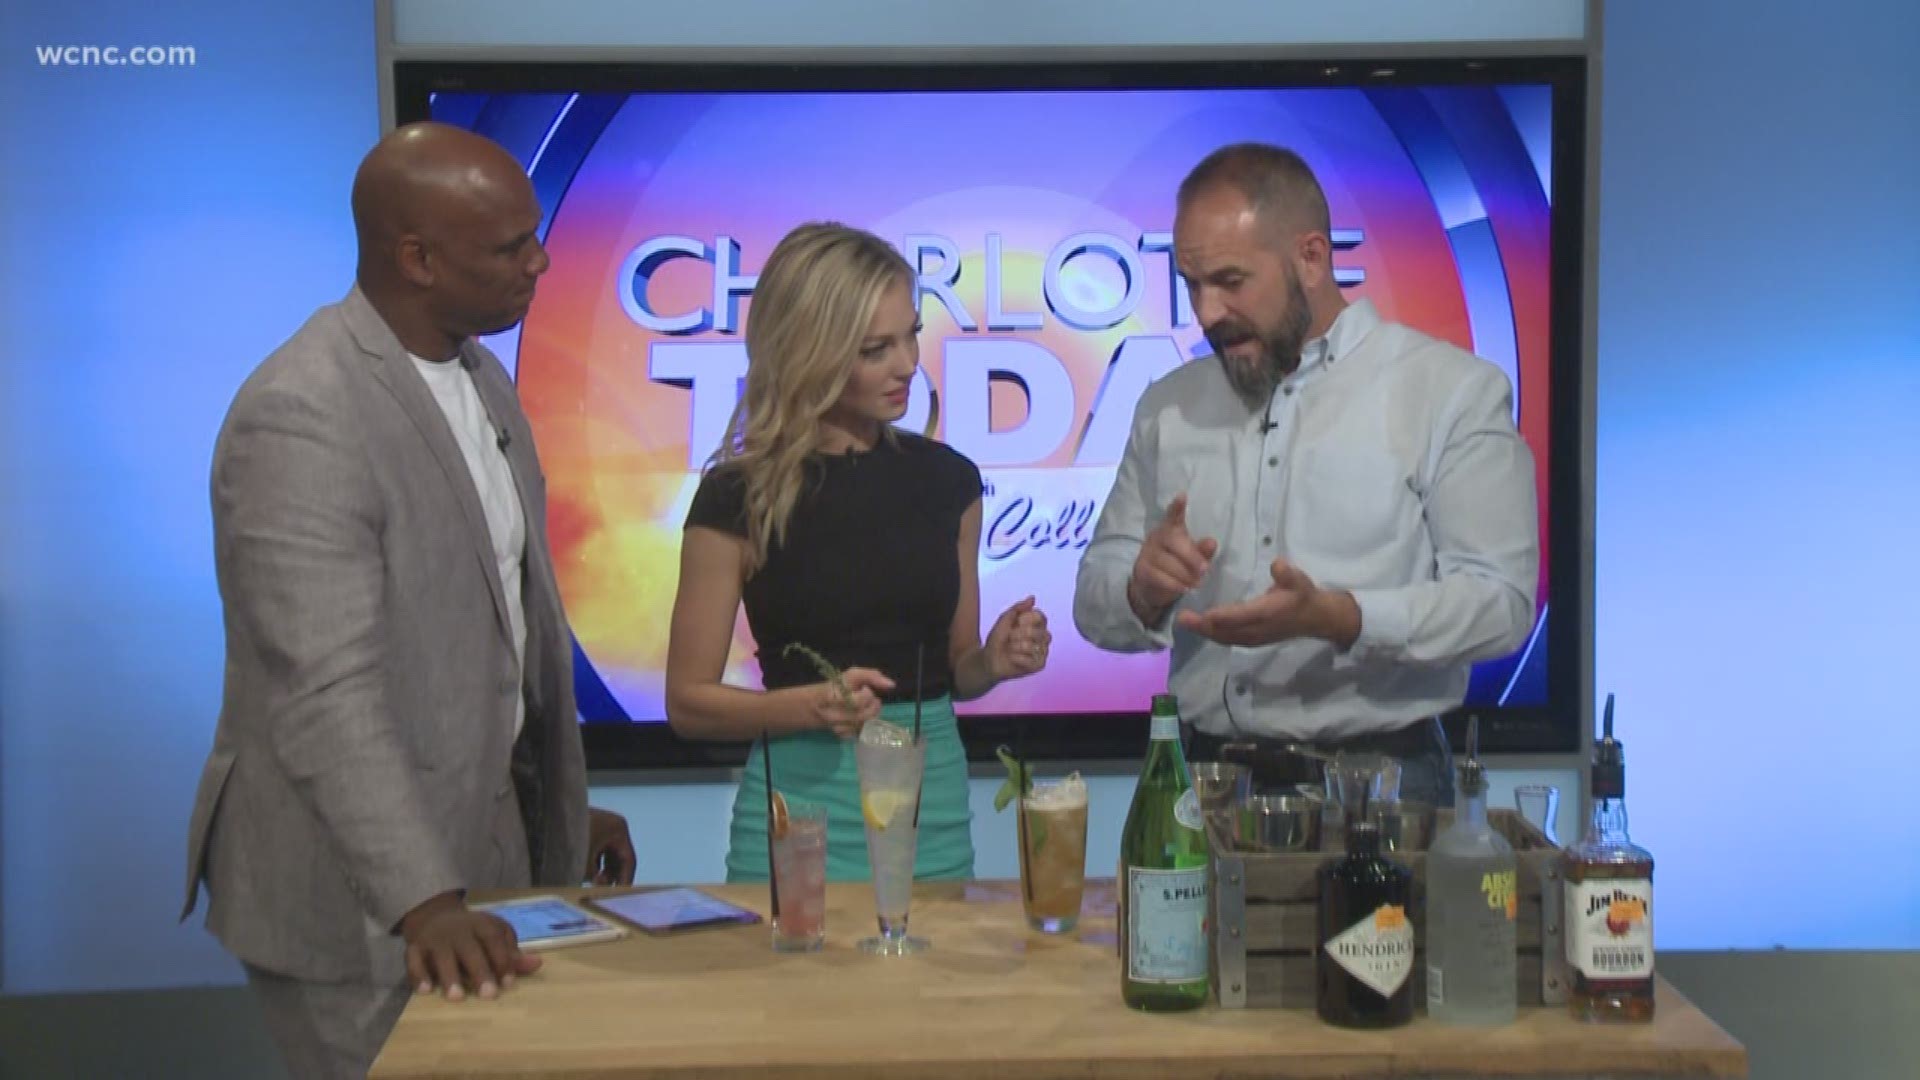 Beverage specialist Michael Mascali from WP Kitchen   Bar has some refreshing drinks